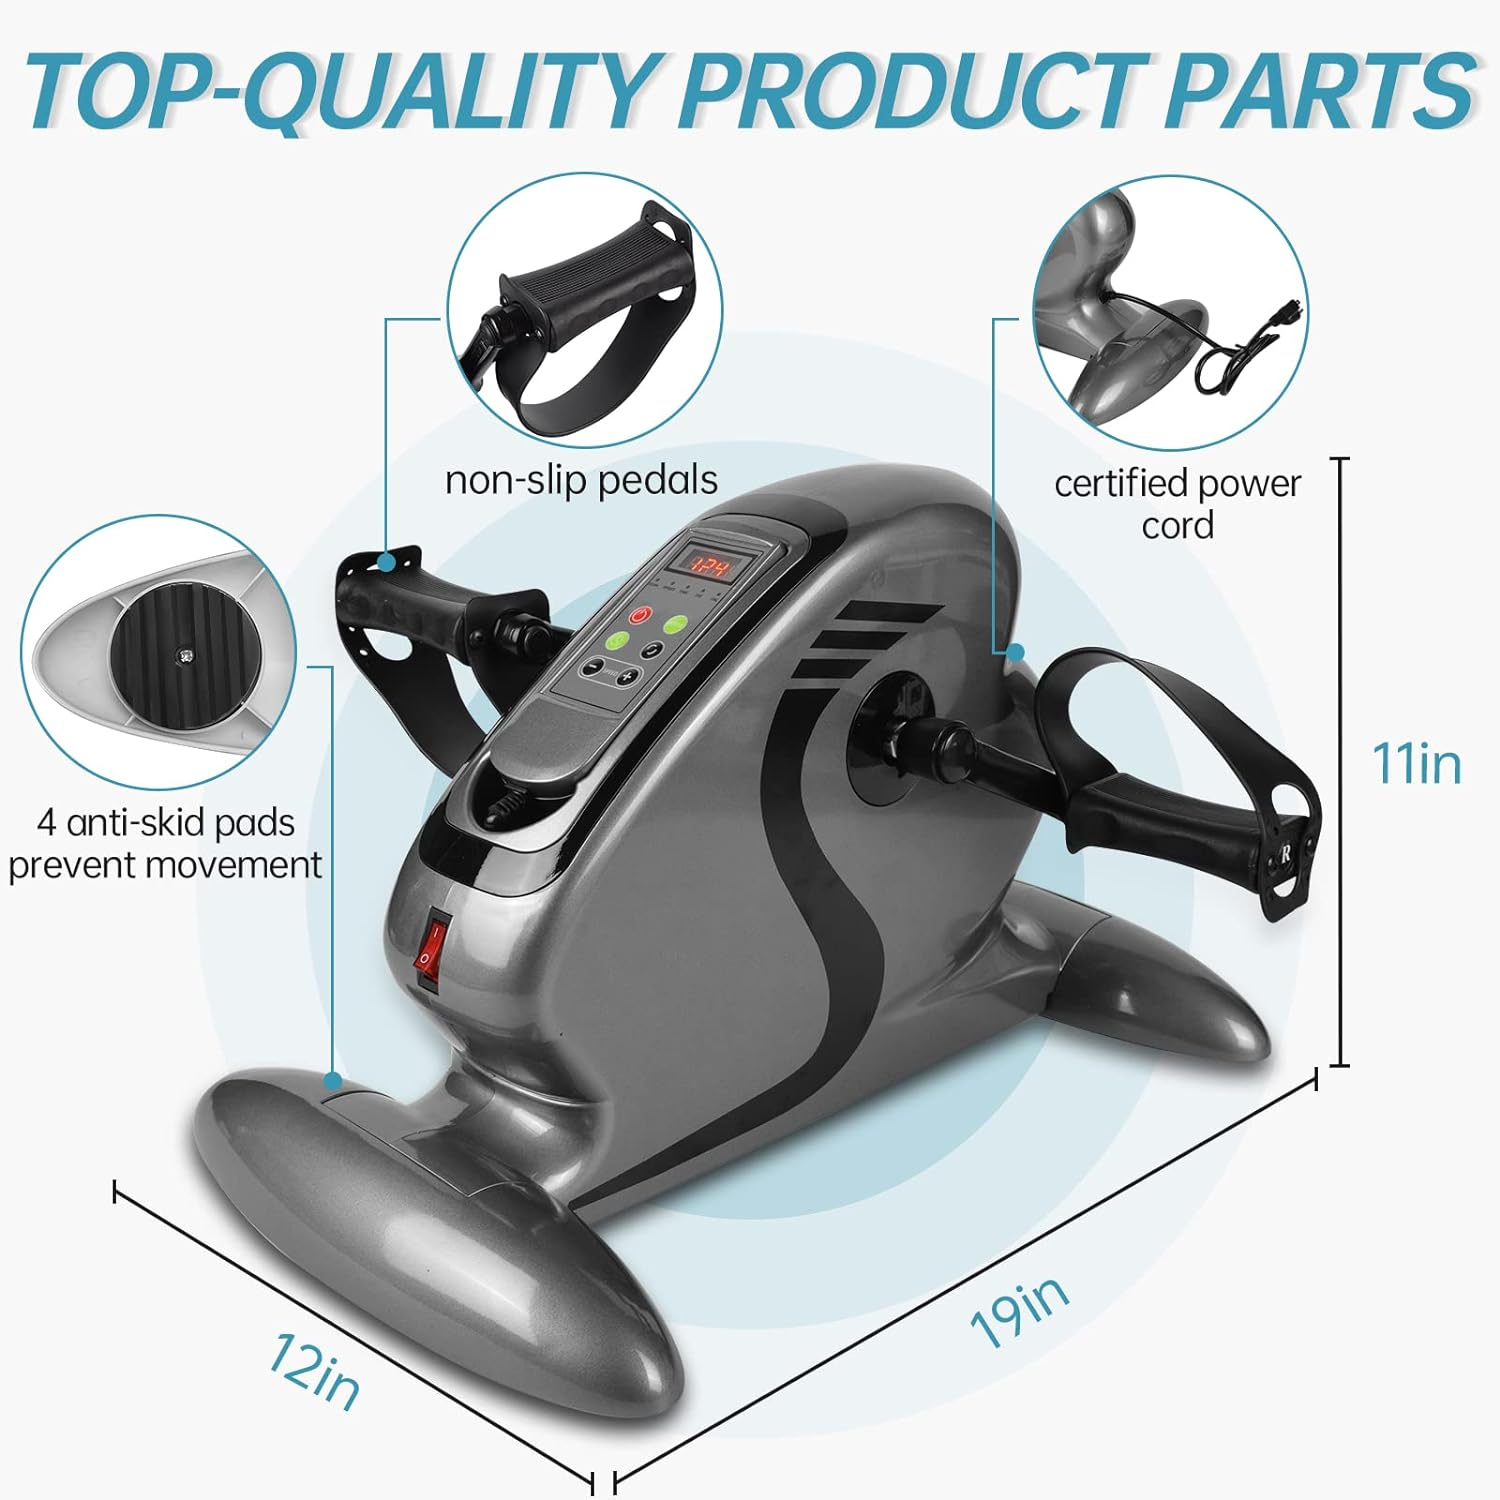 The DQGM Electric Mini Exercise Bike Motorized Pedal Exerciser is a low-impact, resistance-free fitness and rehabilitation device. This under-desk bicycle pedal exerciser is your ideal fitness compani